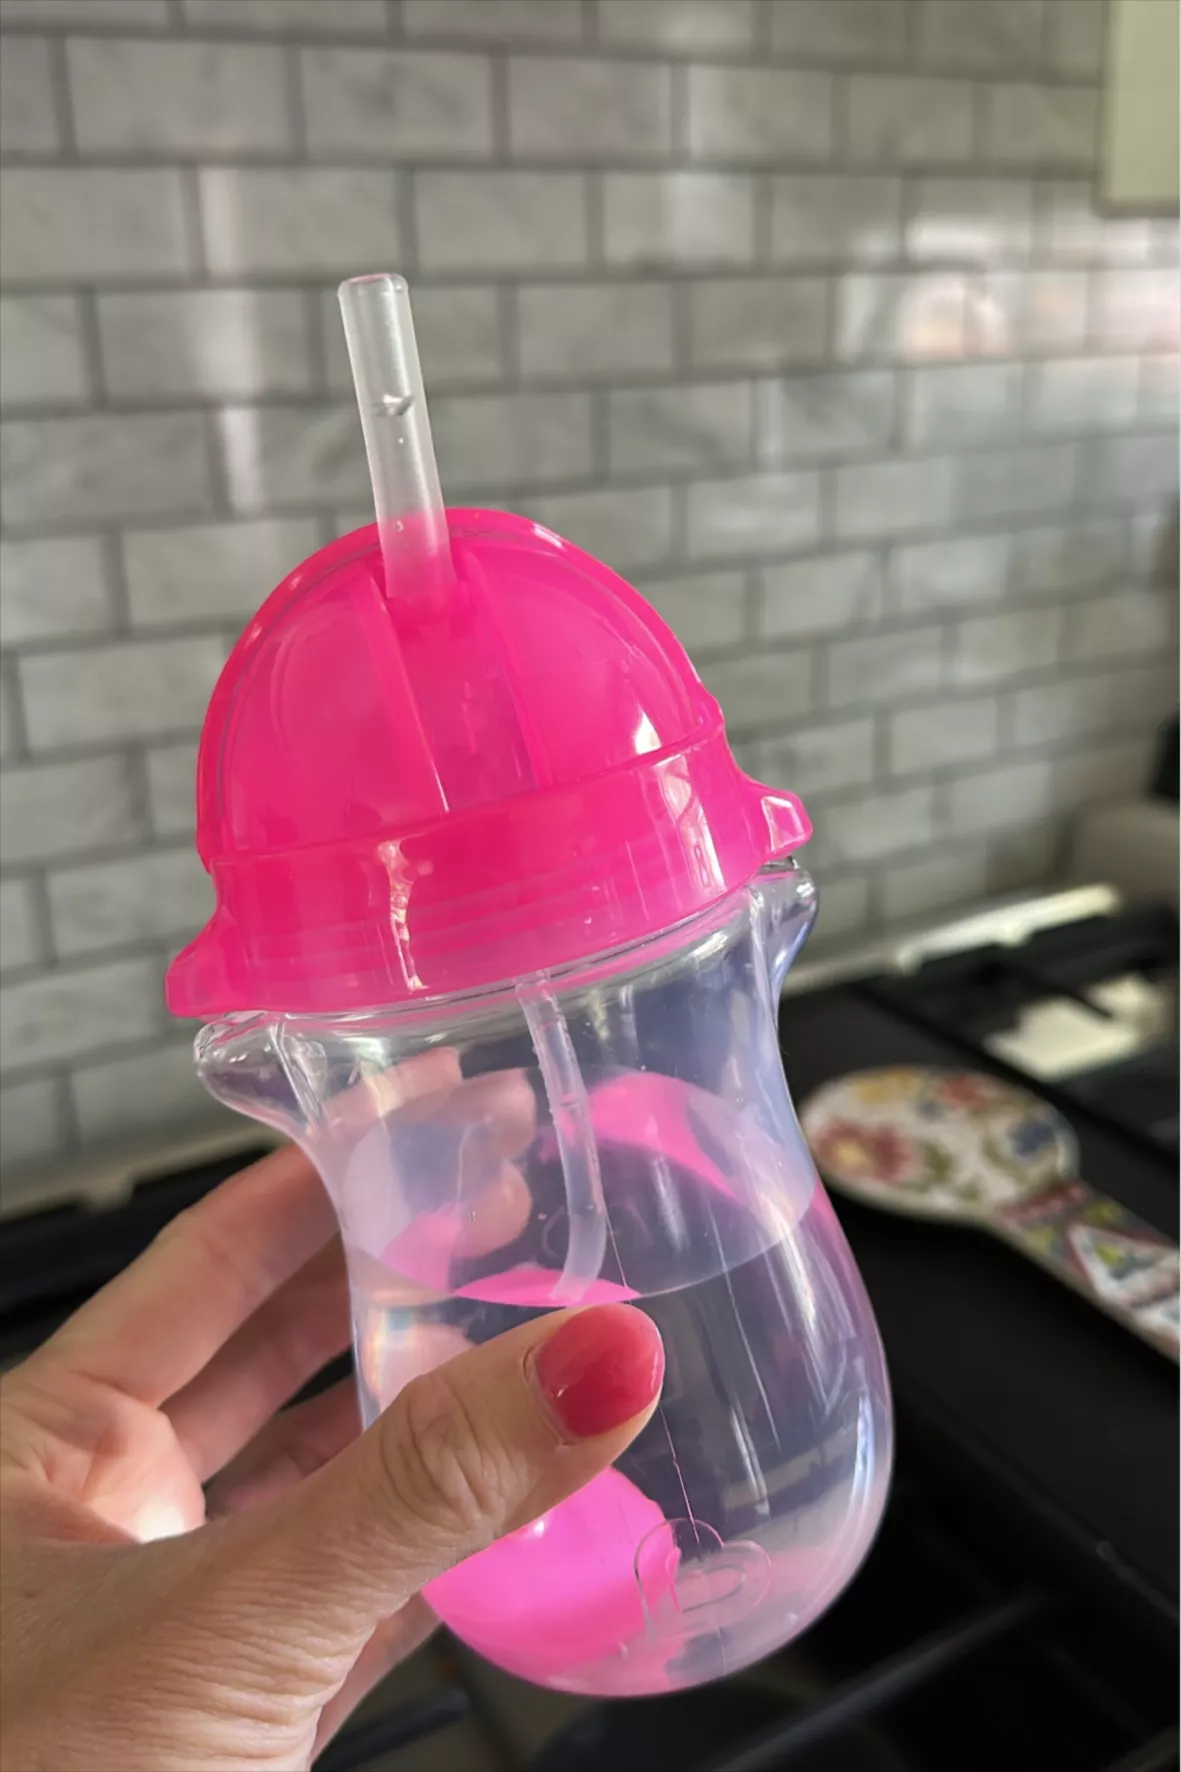 NEW Weighted Sippy Cup by Munchkin